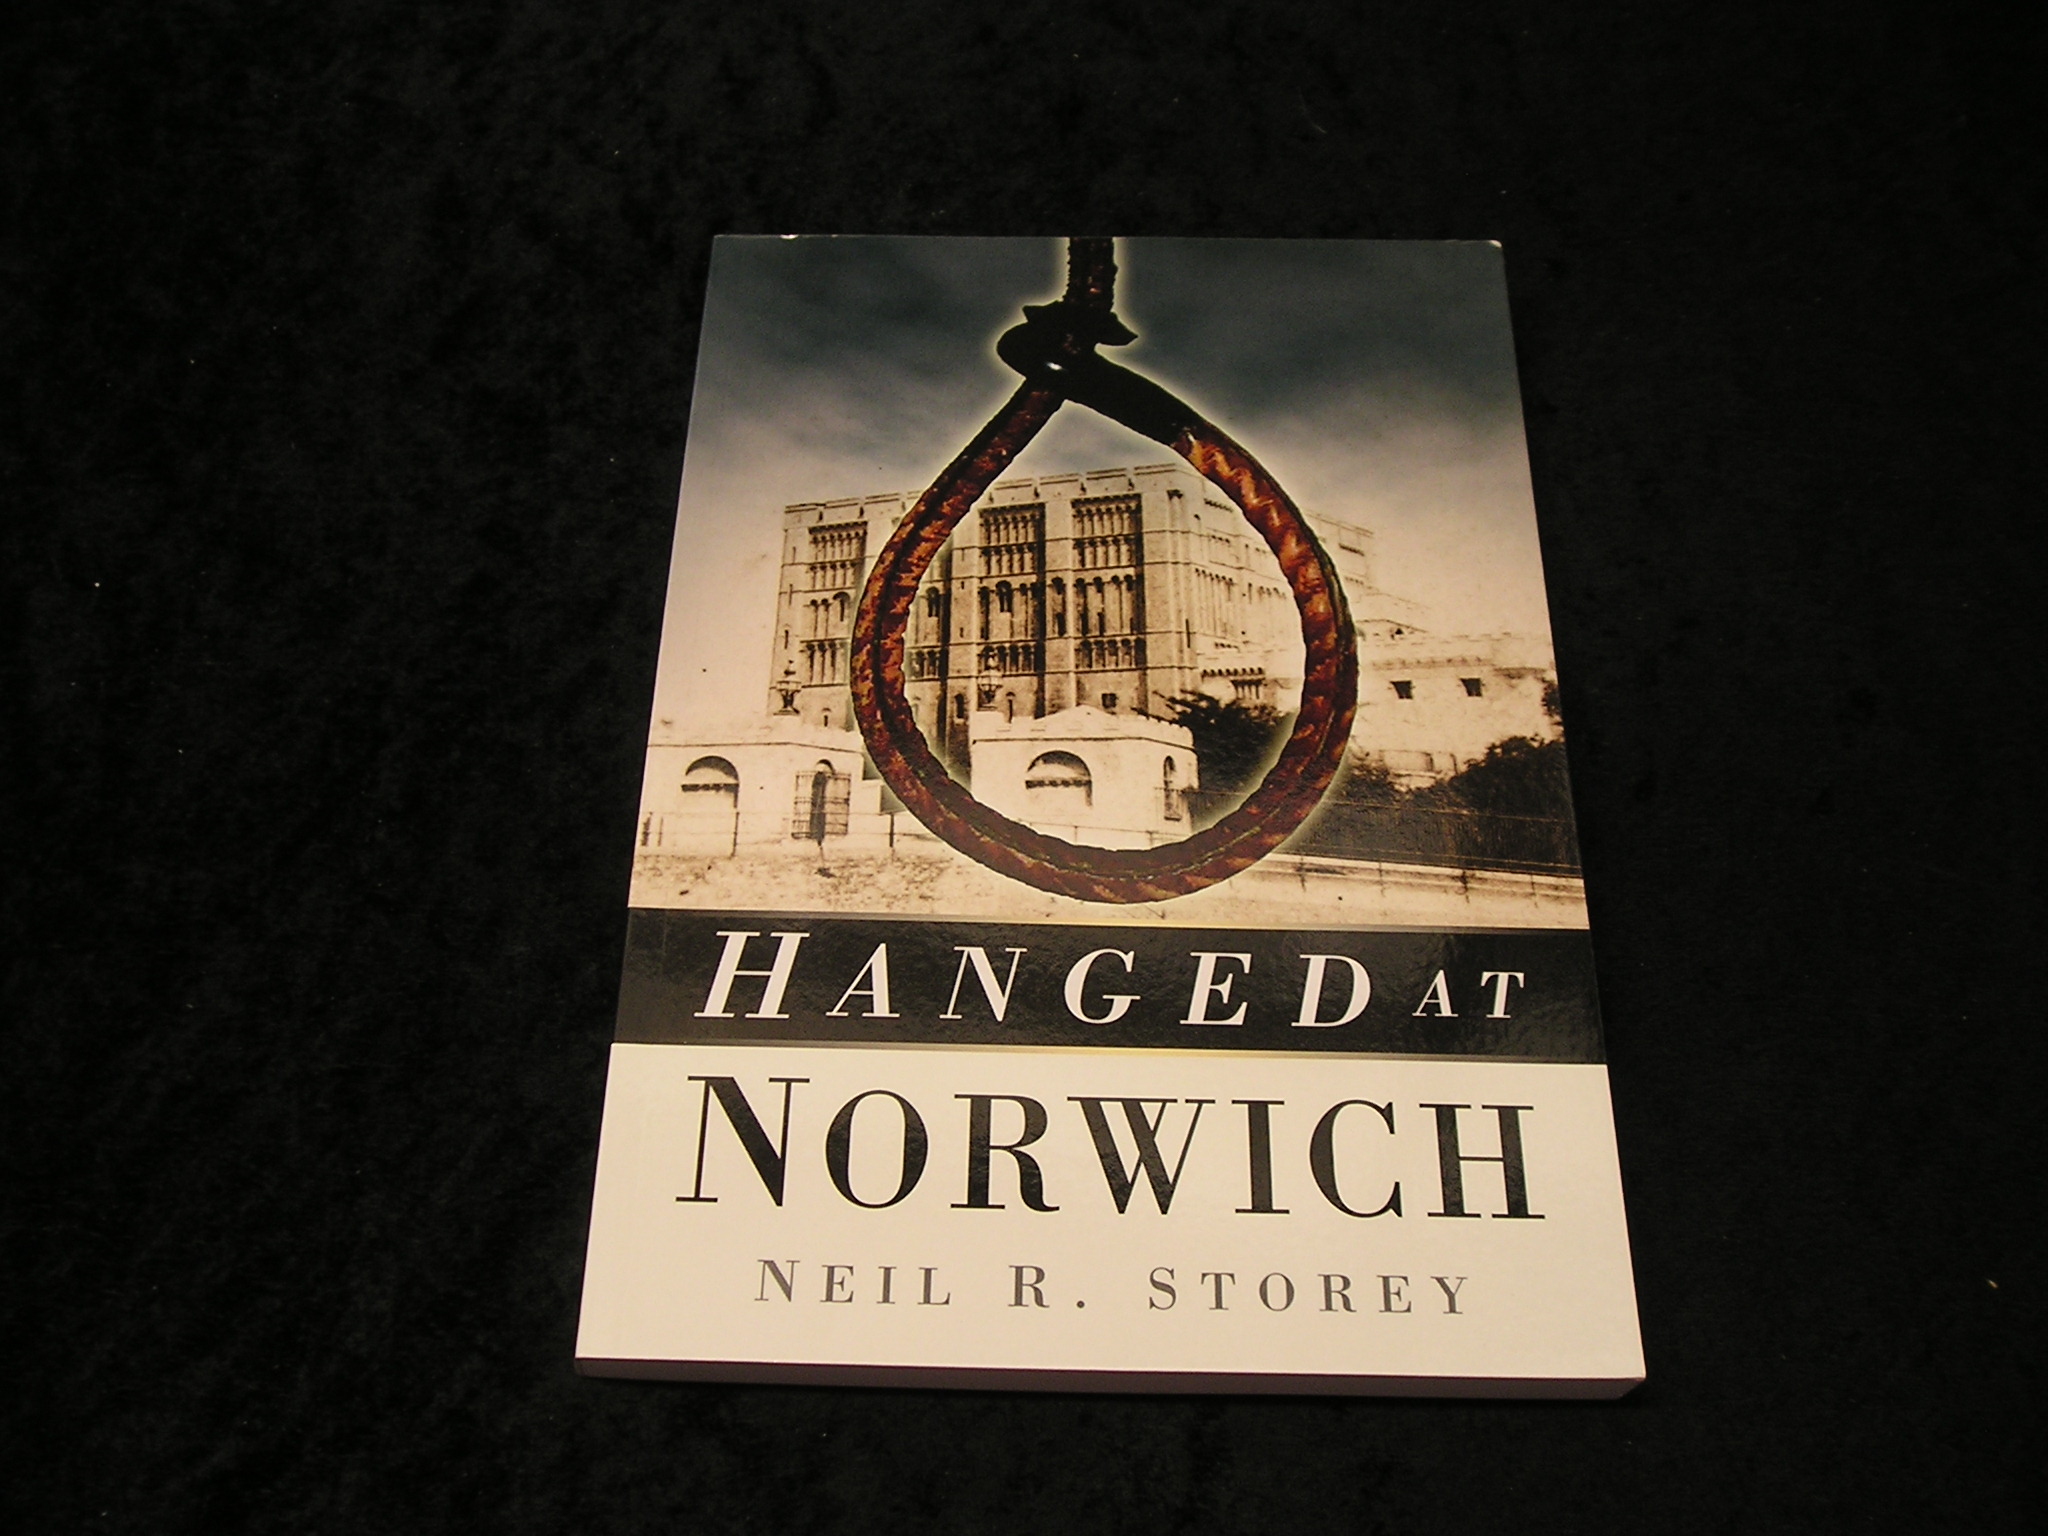 Hanged at Norwich